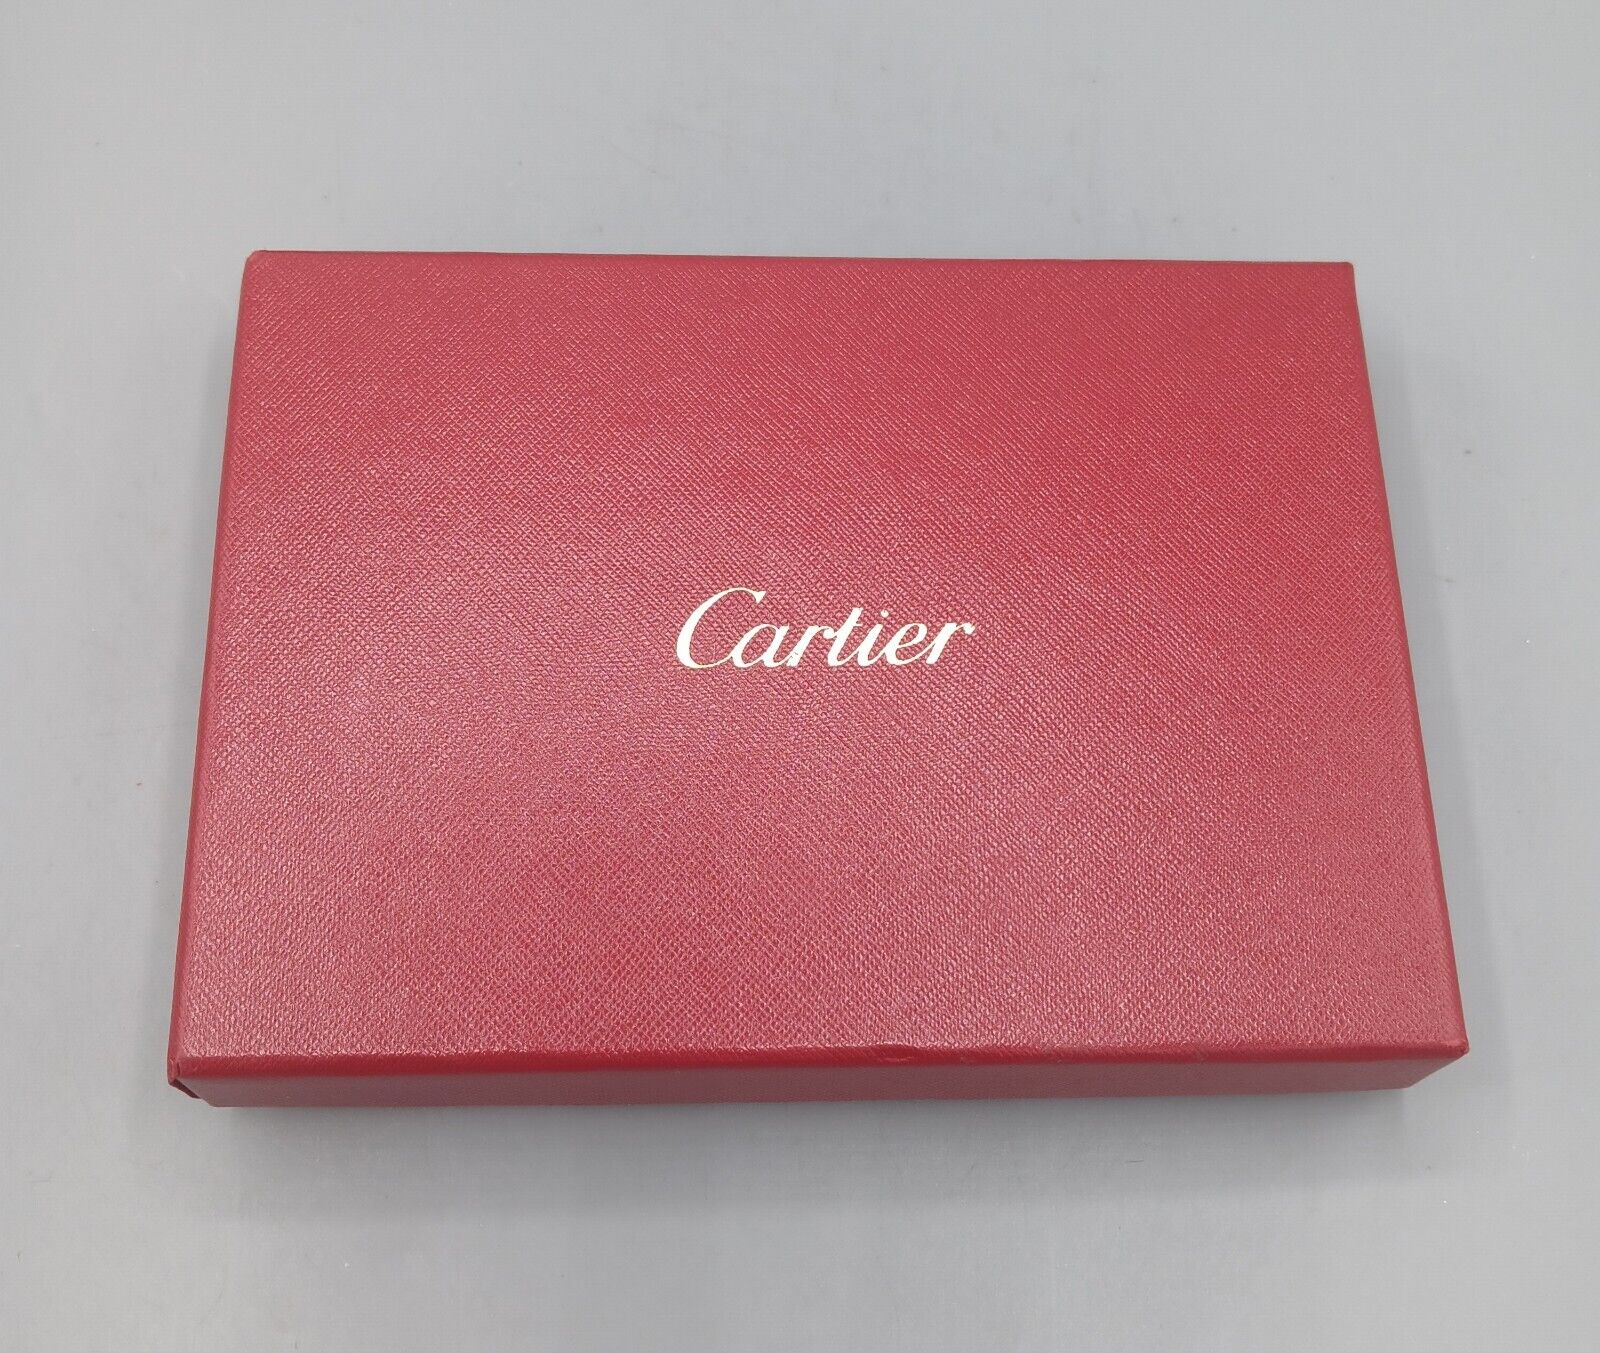 Authentic CARTIER Stationary Box 9 Note Cards Office Supplies Designer *READ*